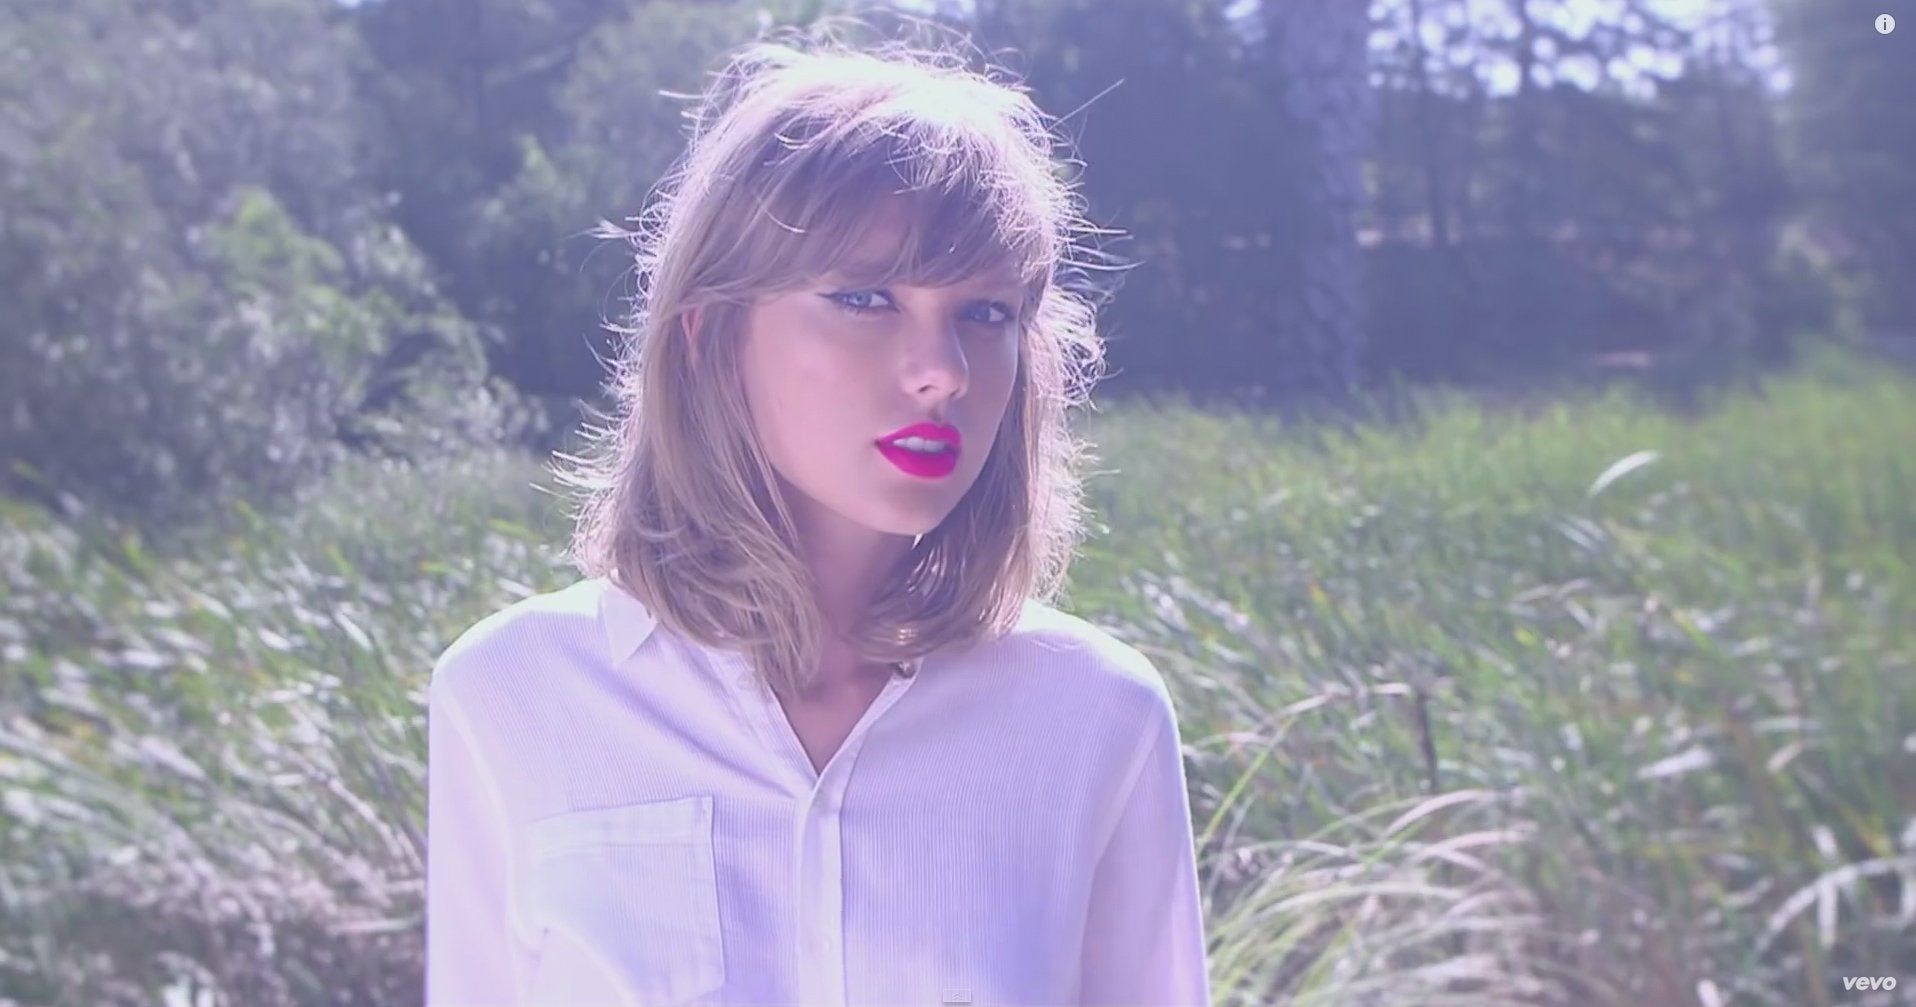 A woman in white shirt and red lipstick - Taylor Swift